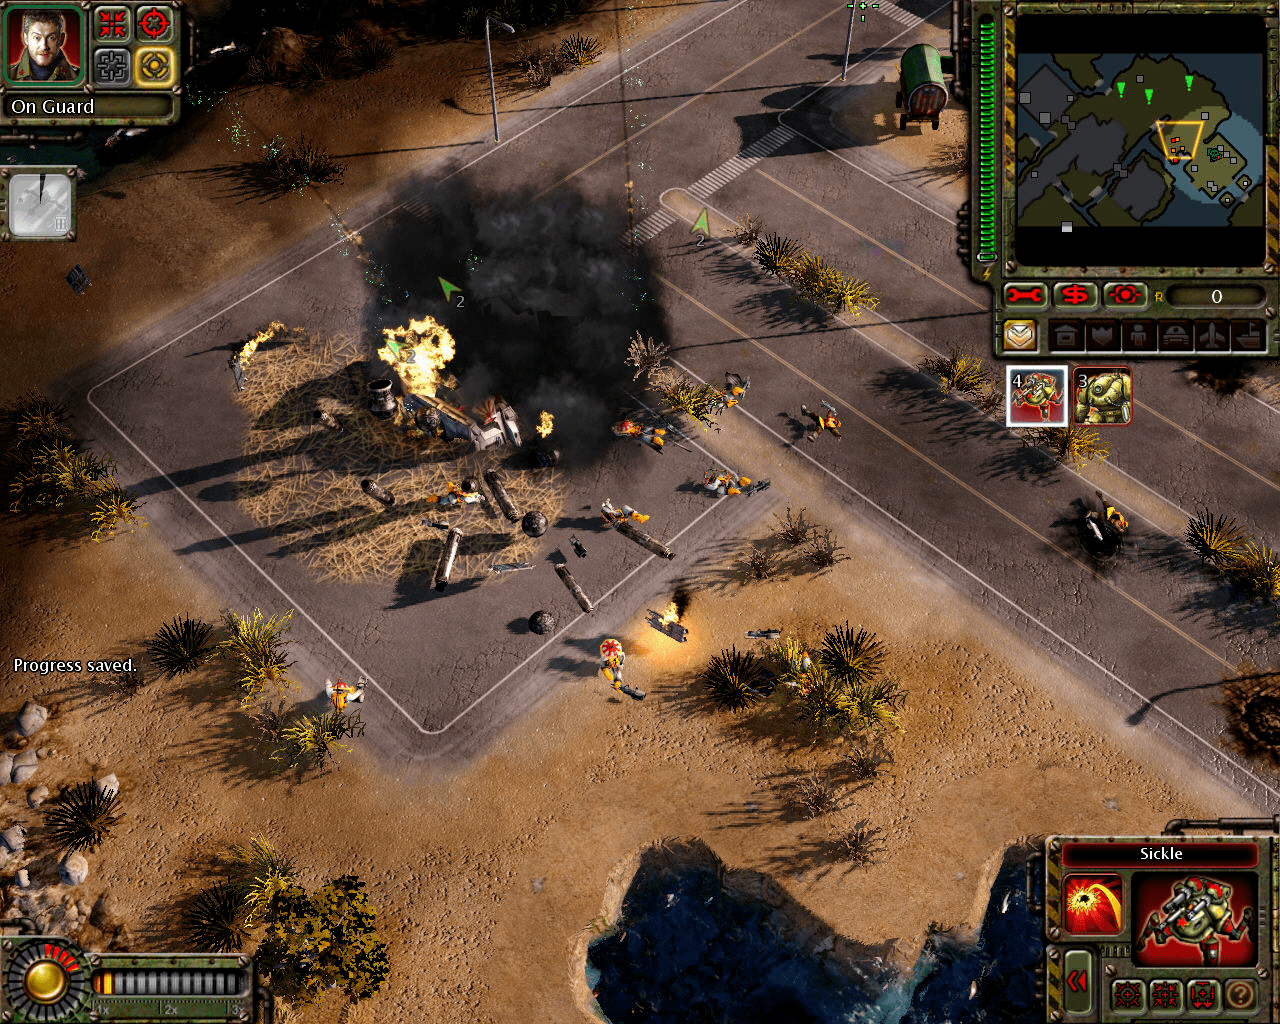 command and conquer red alert 3 windows 10